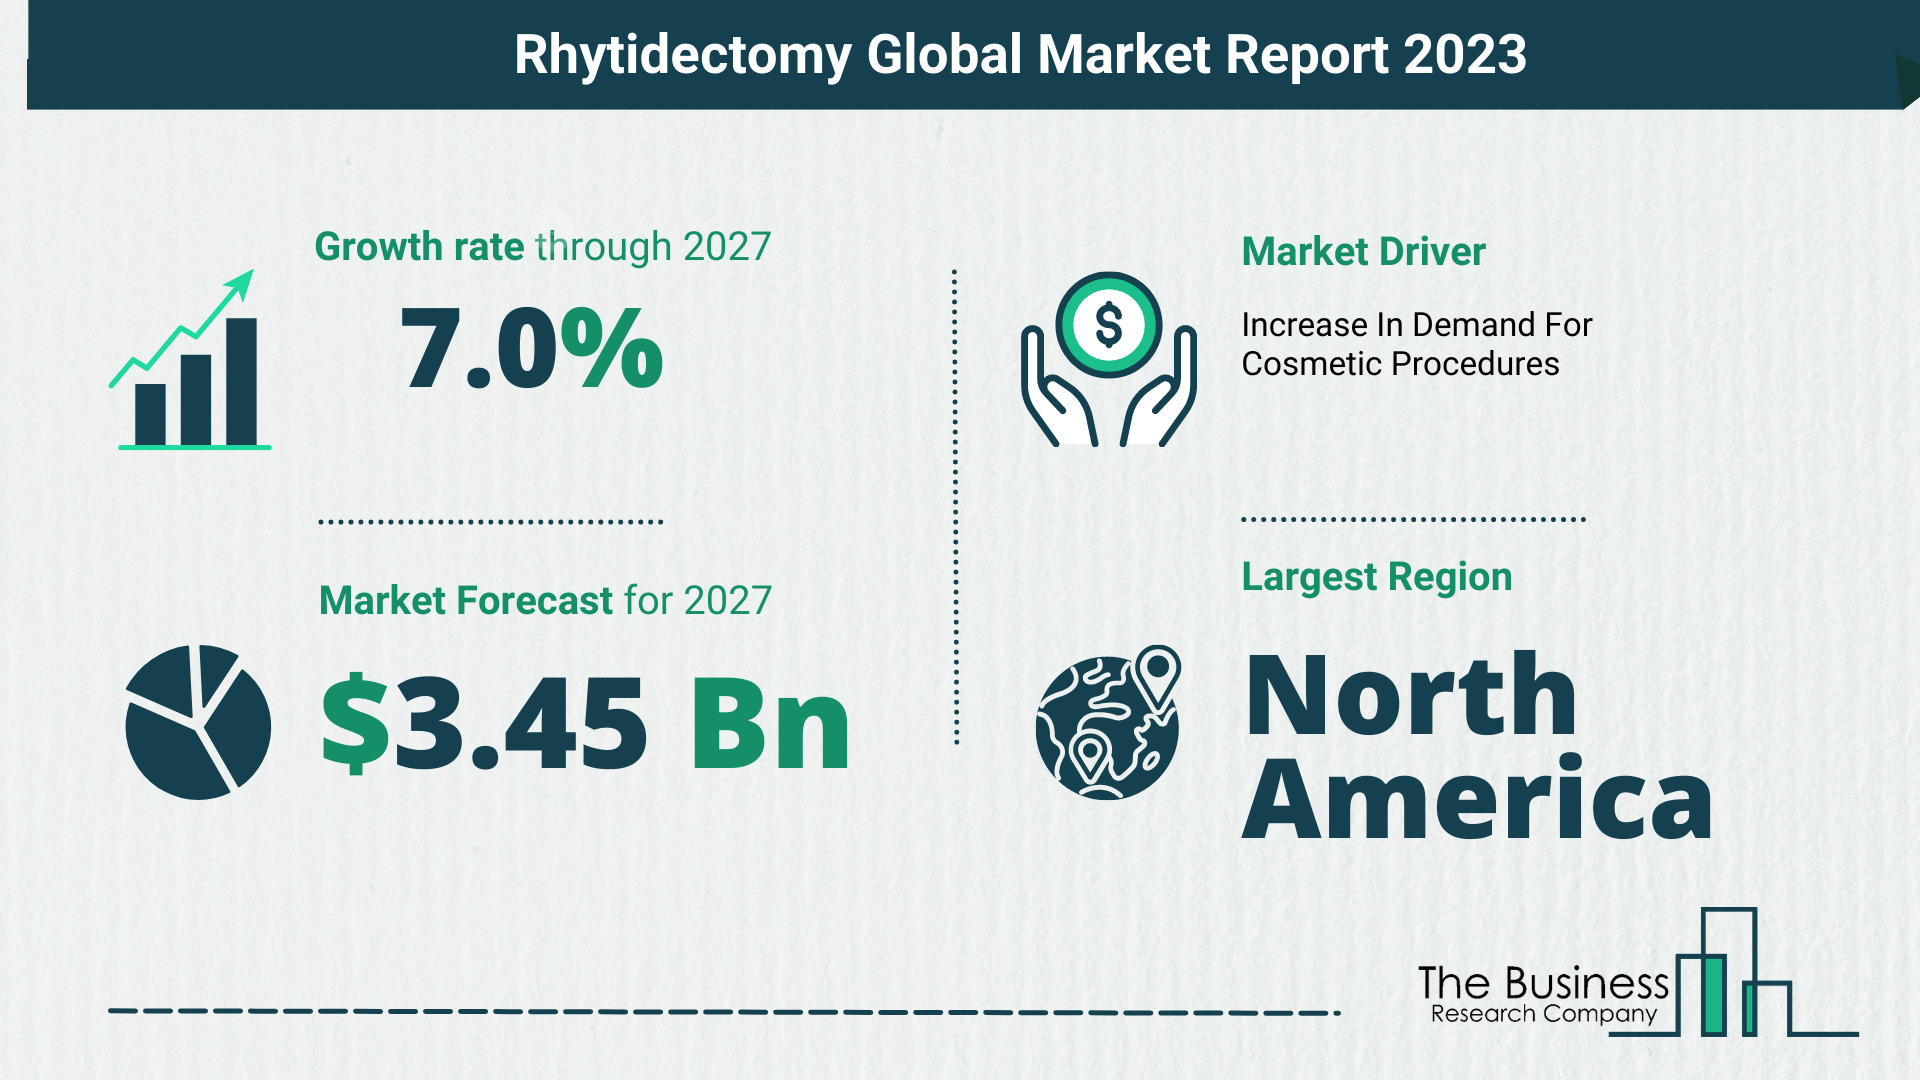 Global Rhytidectomy Market Opportunities And Strategies 2023